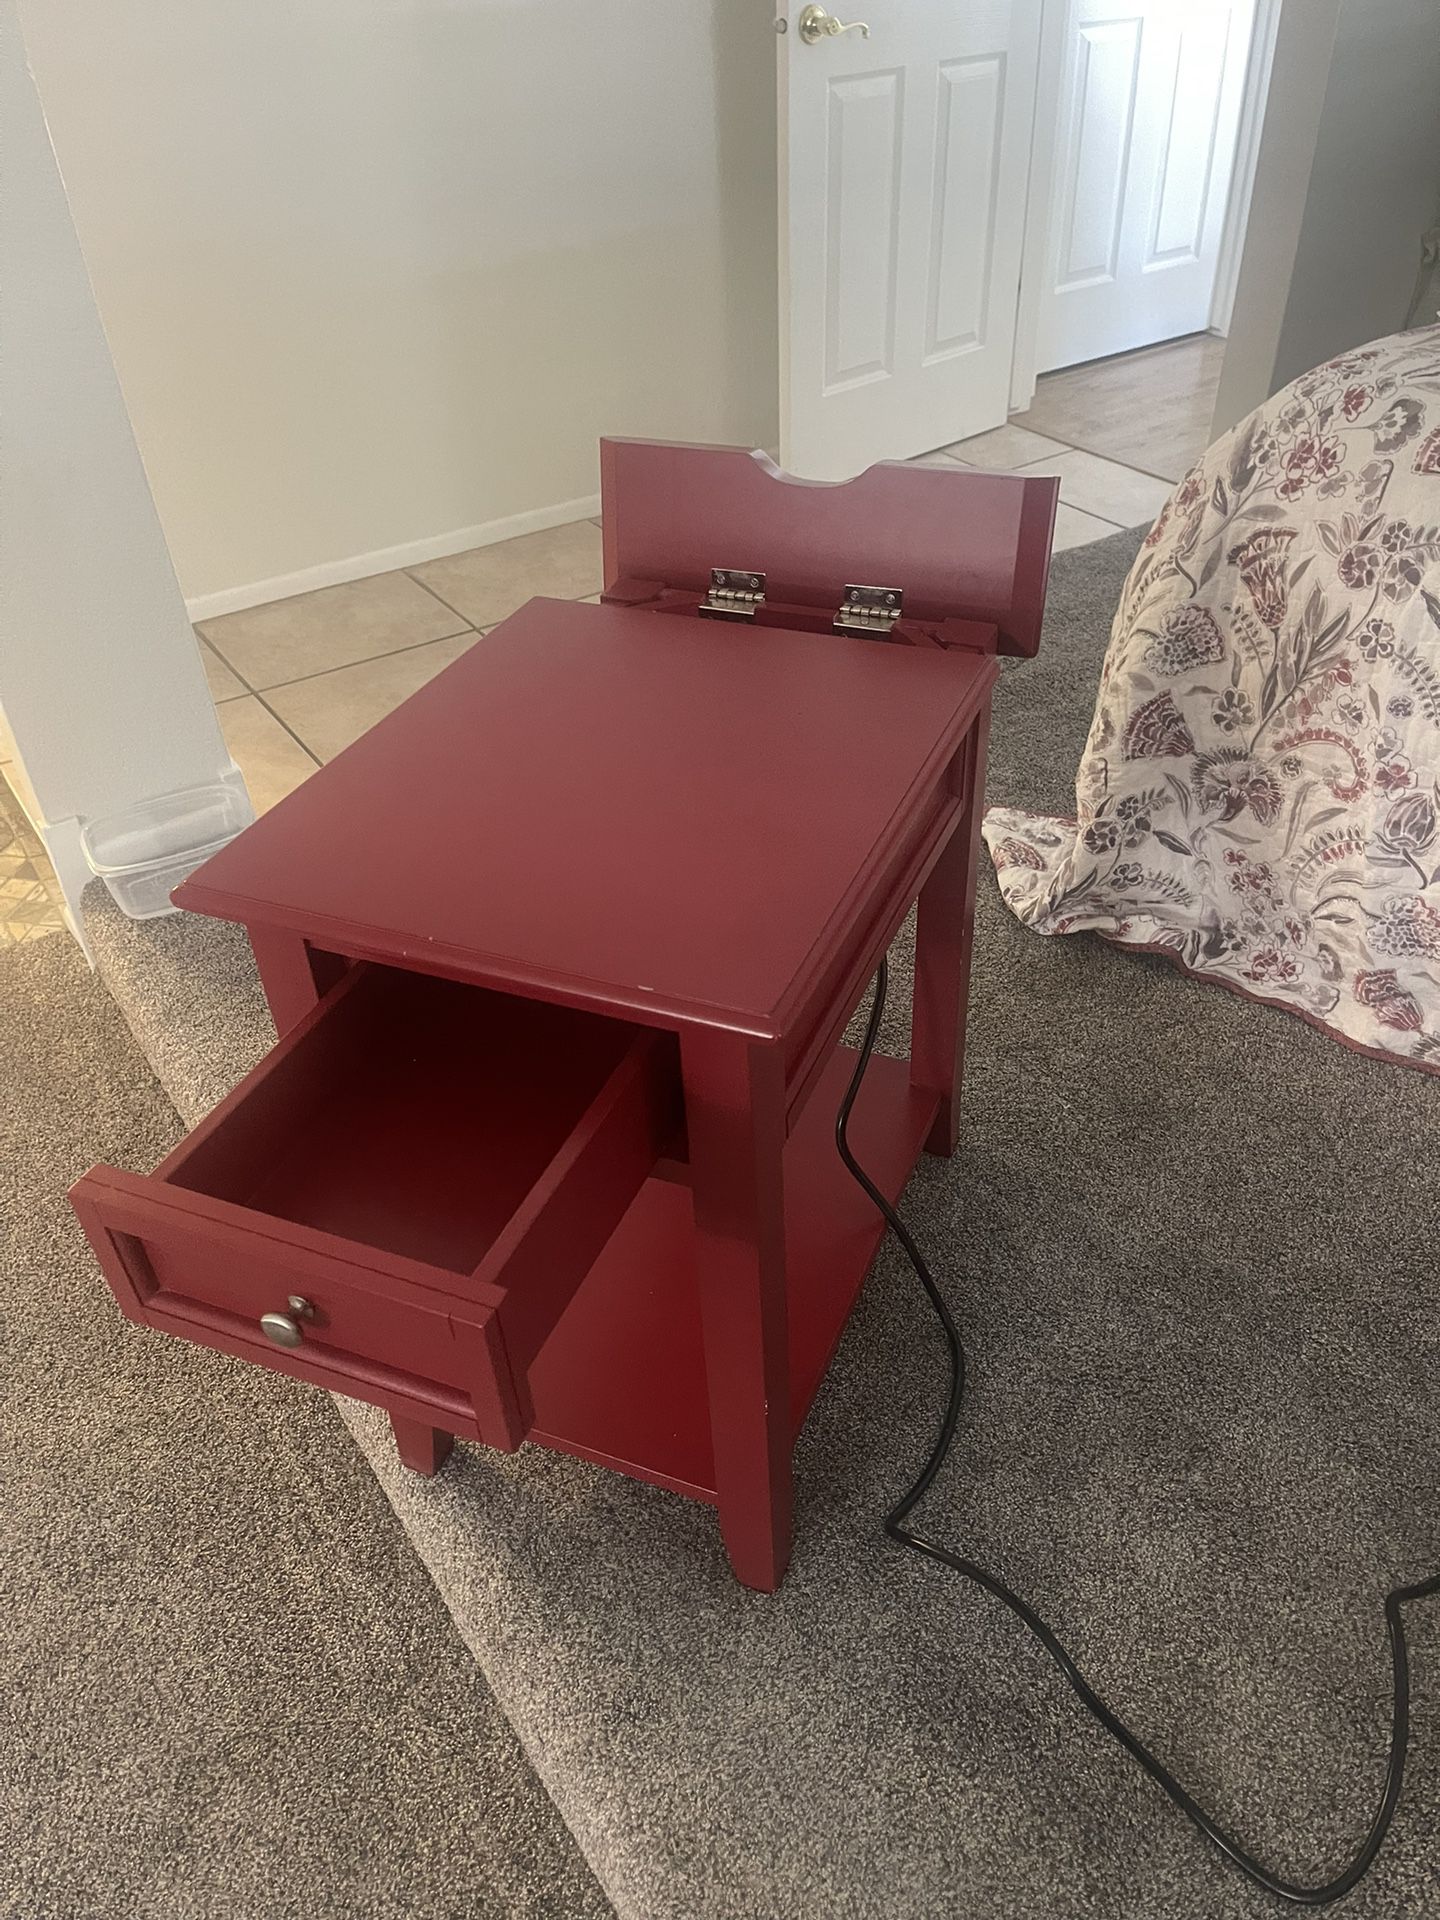 End Table With Charging Station